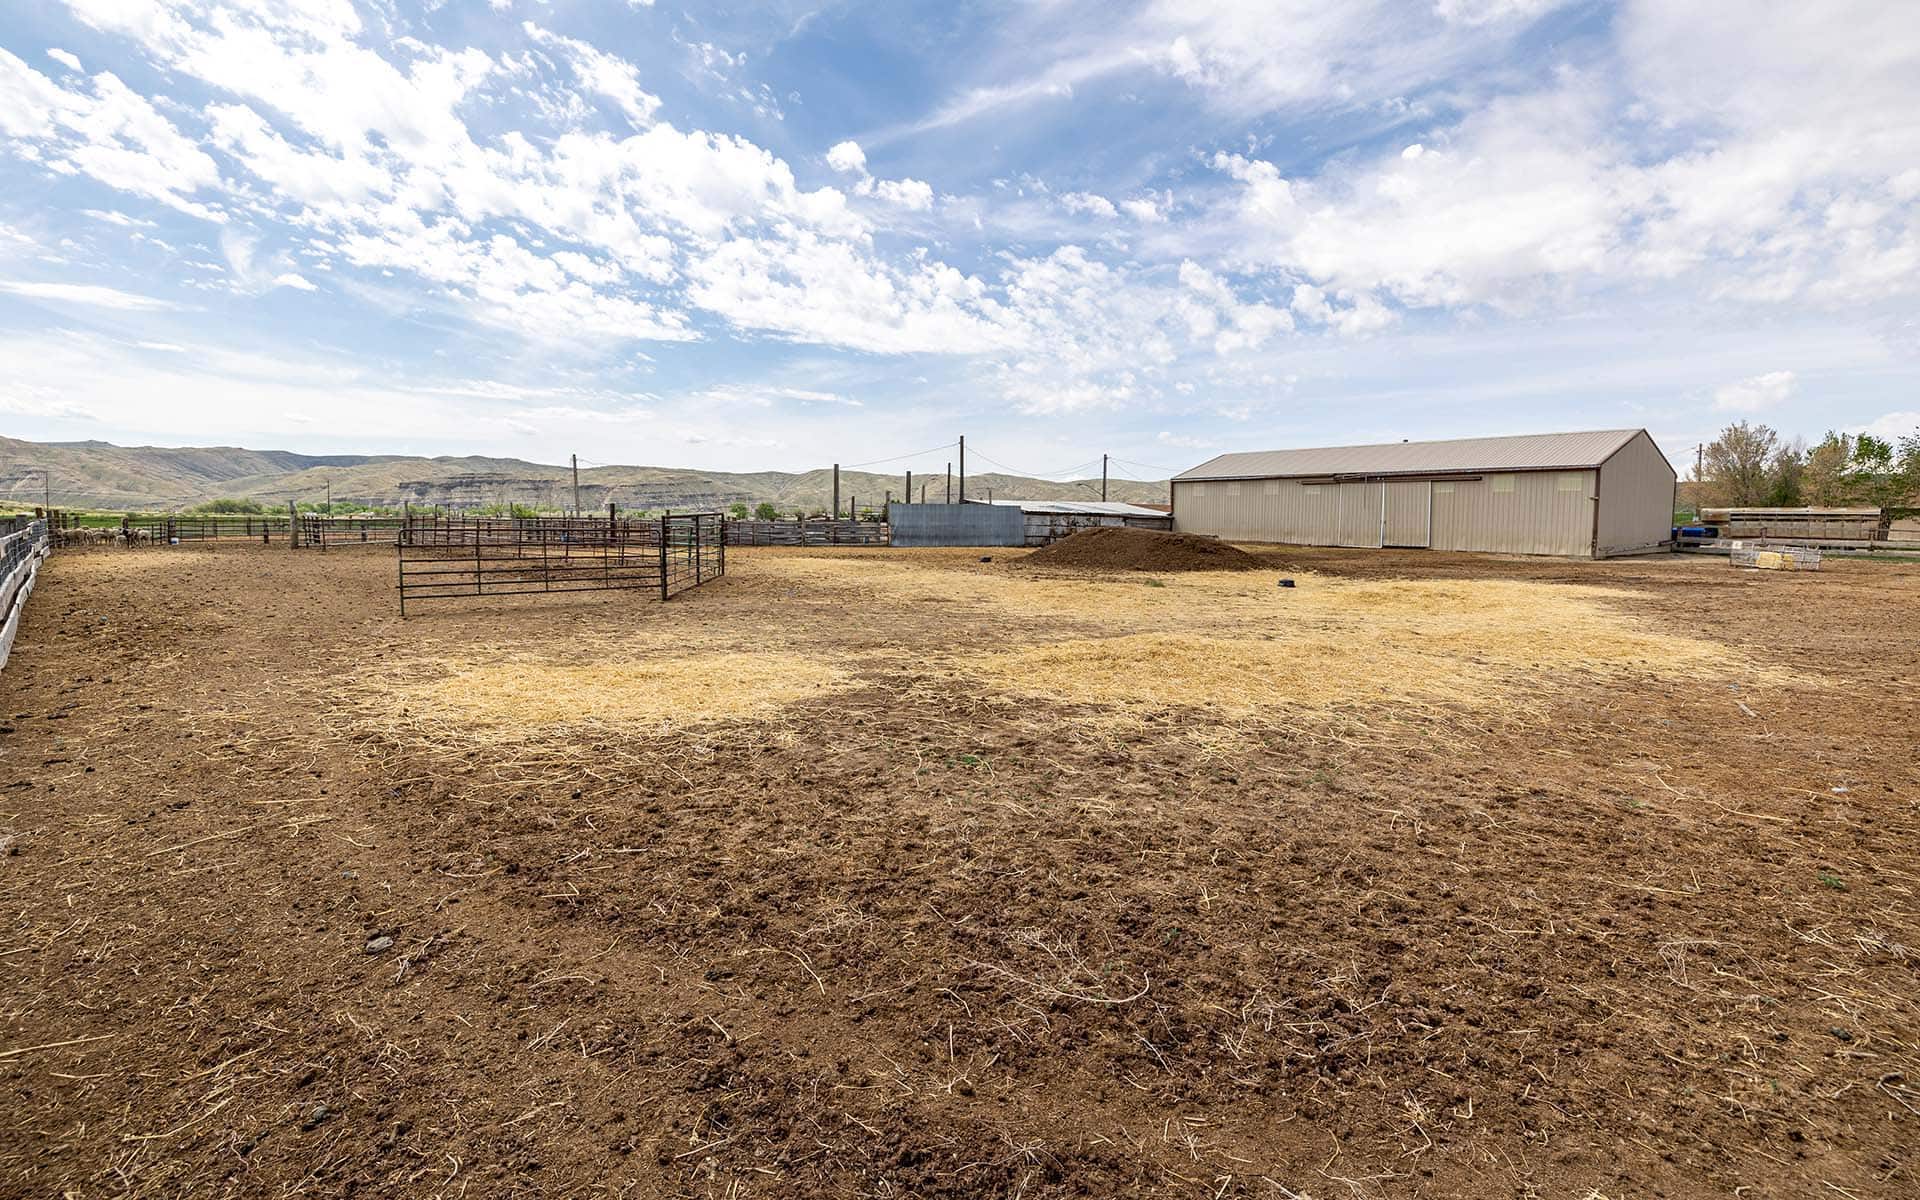 wyoming cattle ranch for sale wyoming butterfield farm and livestock